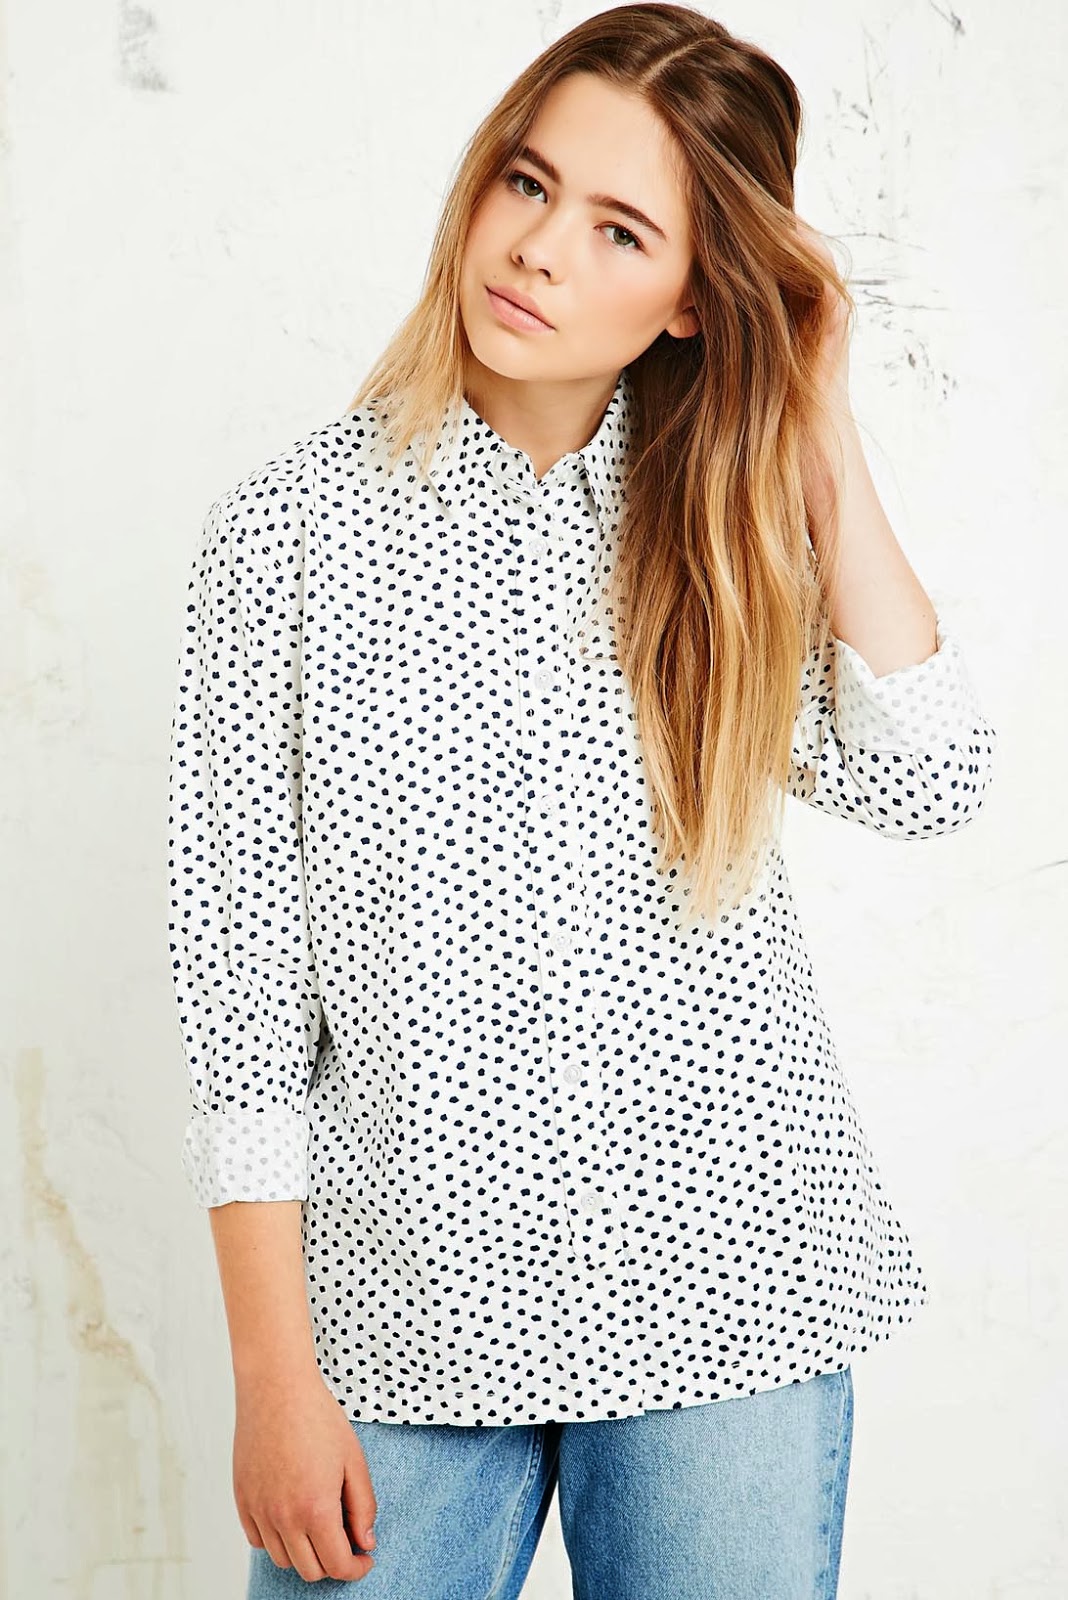 urban outfitters spotty shirt